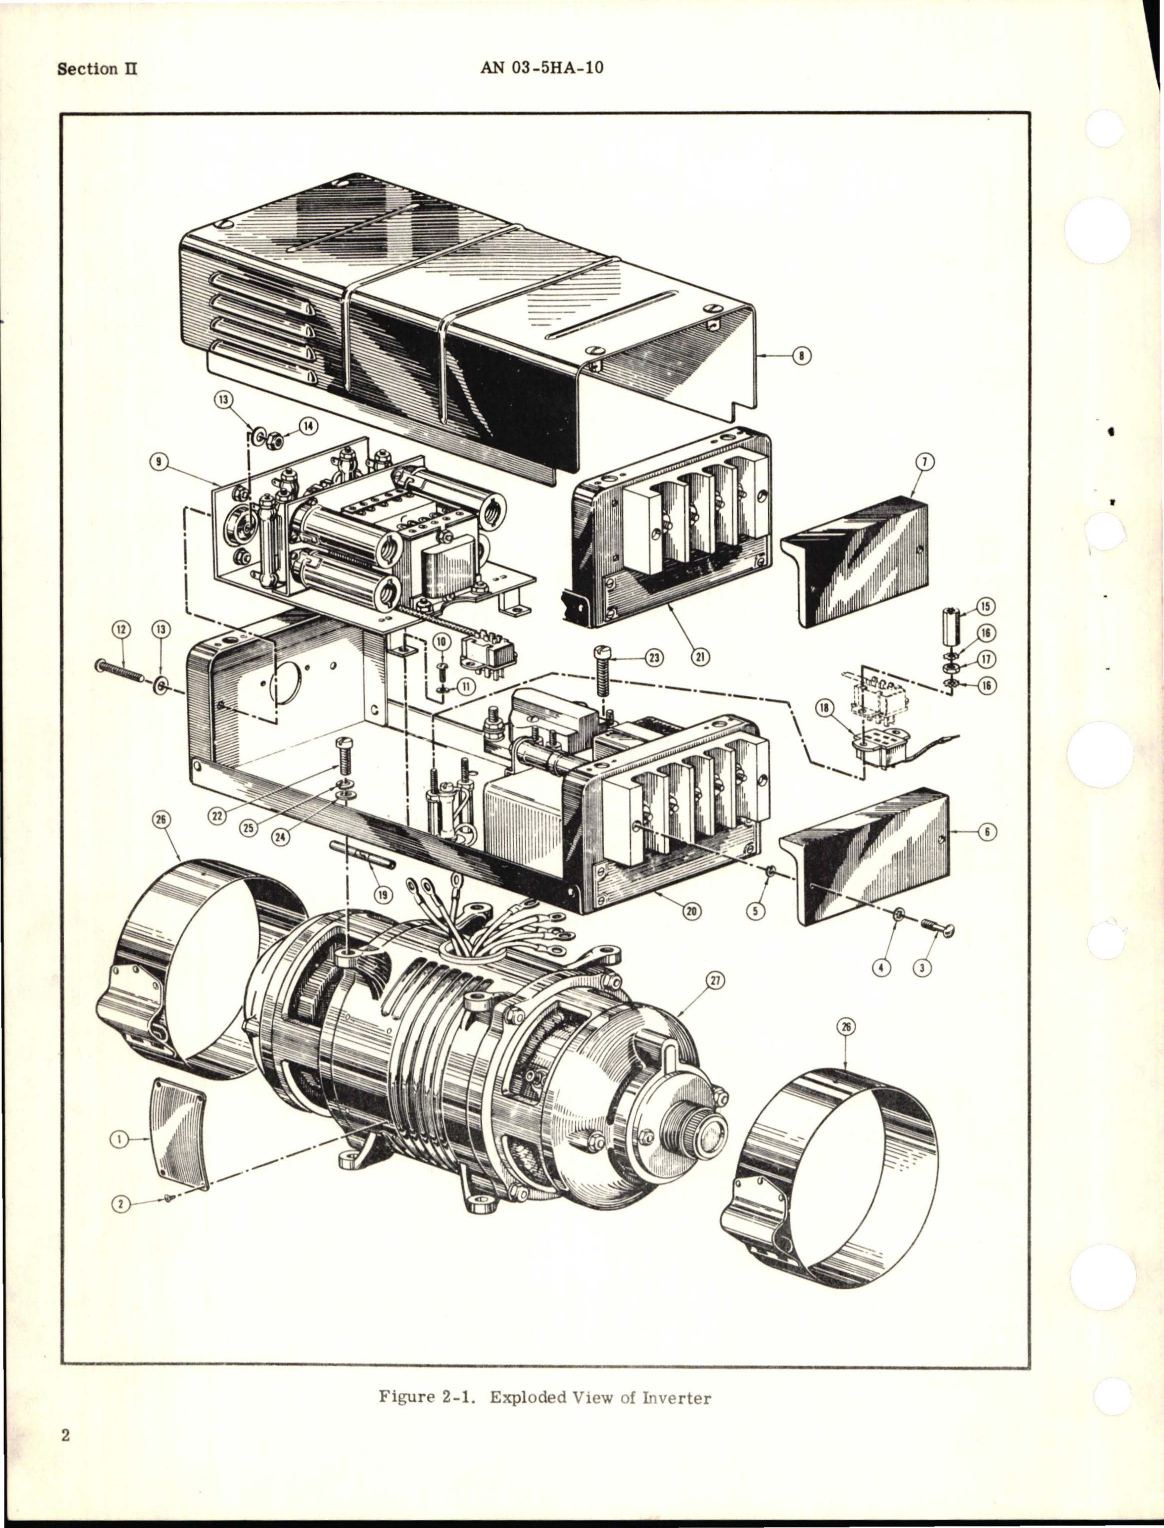 Sample page 6 from AirCorps Library document: Overhaul Instructions for Inverter - Models F20-4, F21-4, F20-4M, and F21-4M